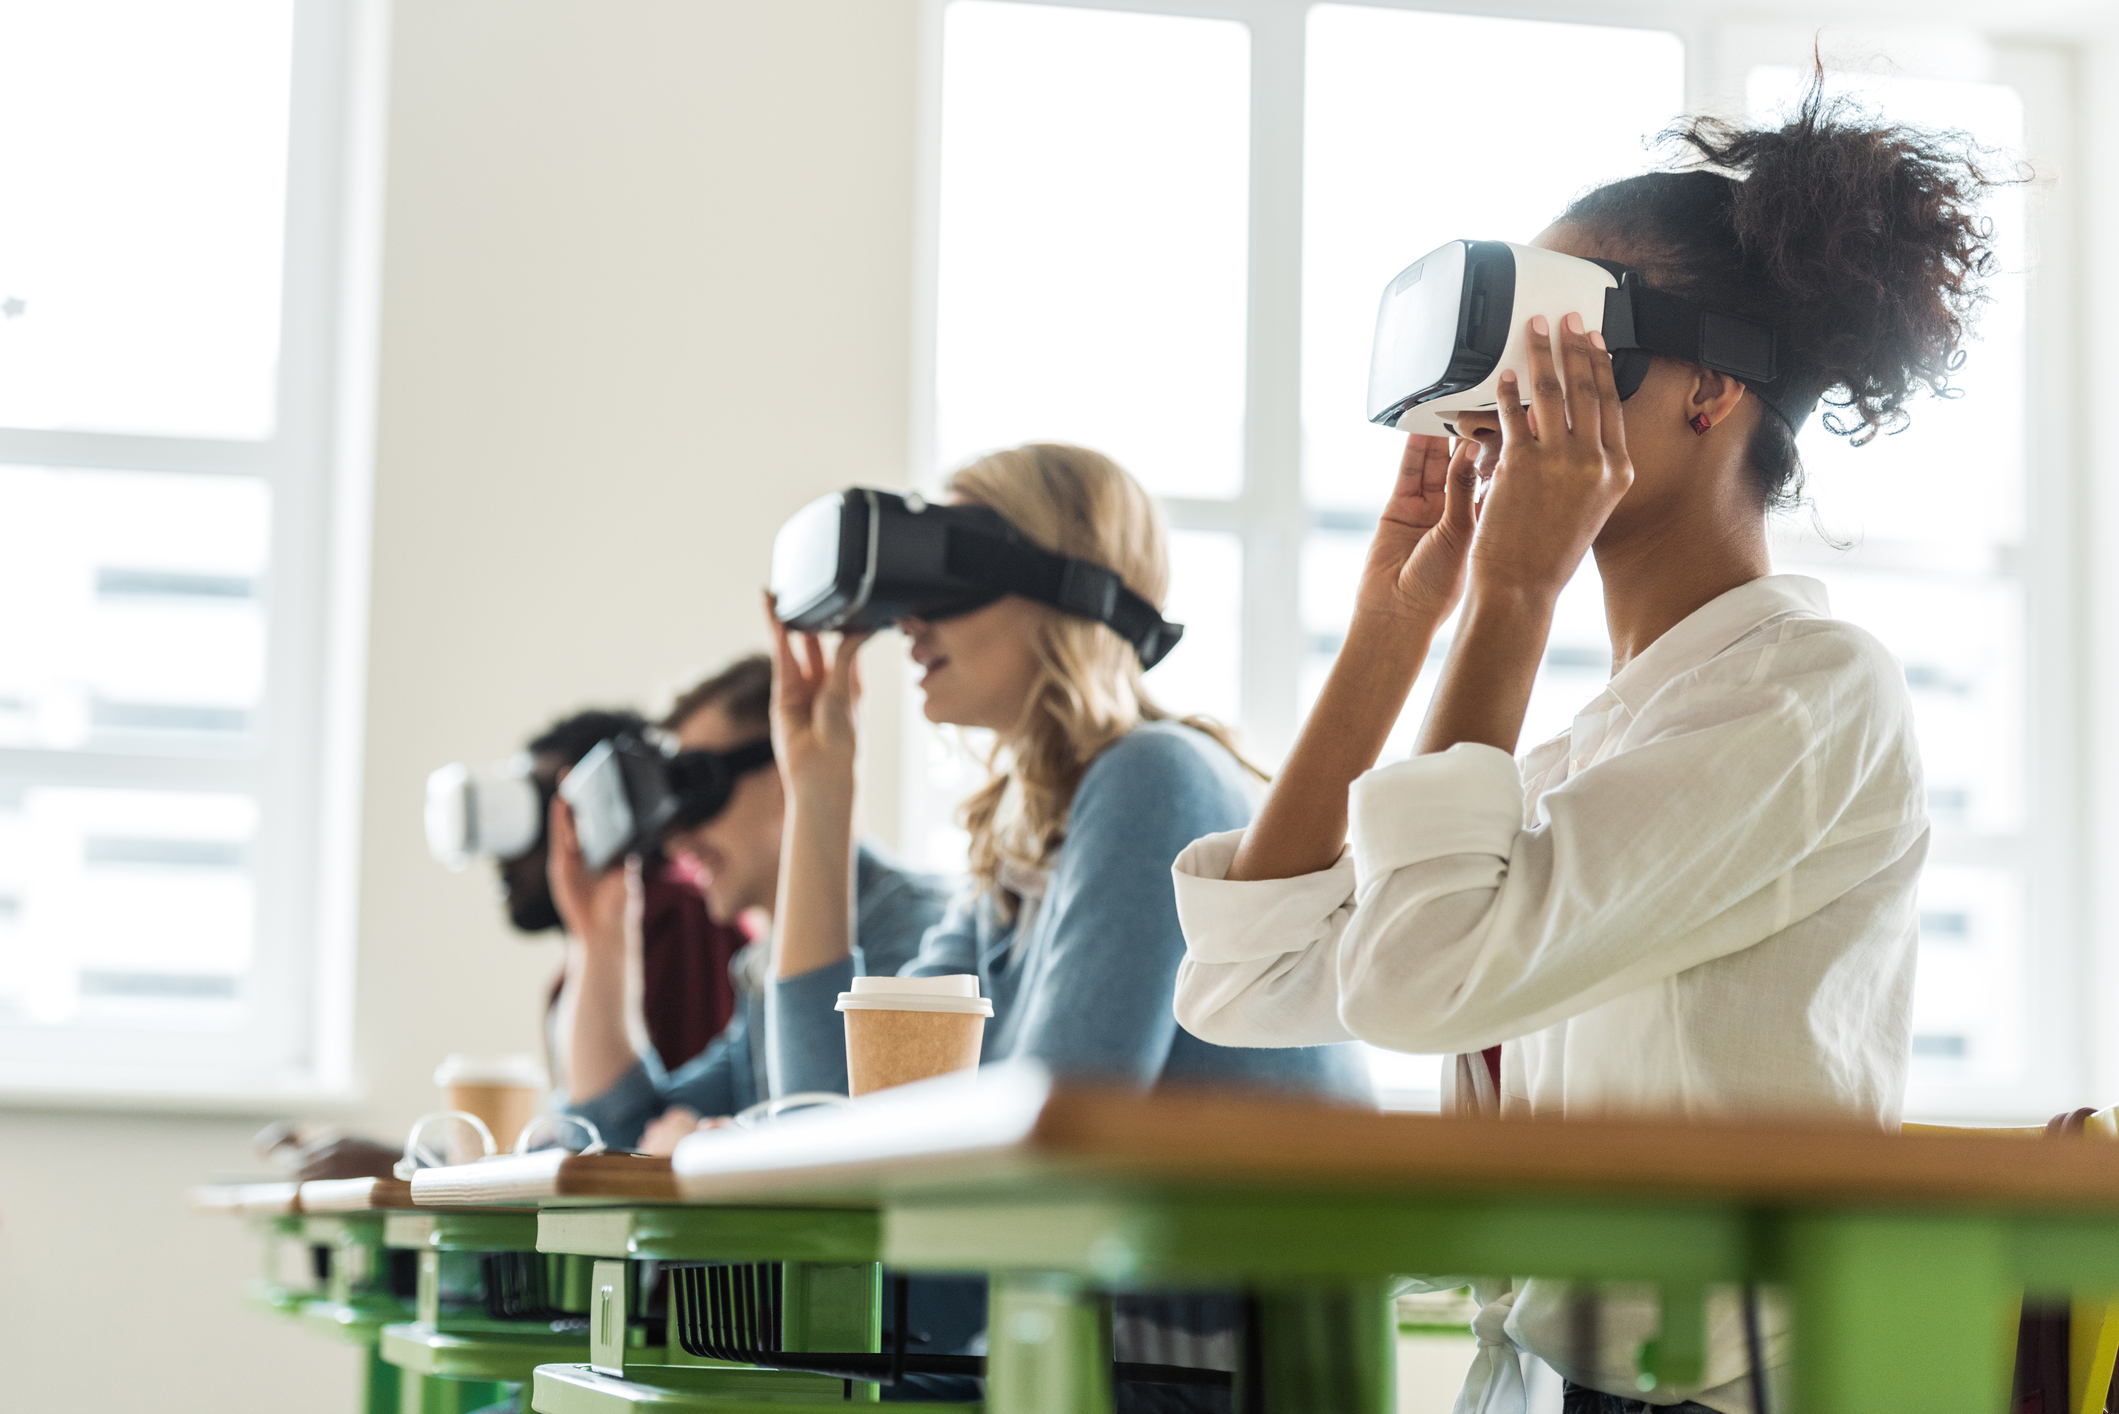 Education for engineering career in AR and VR